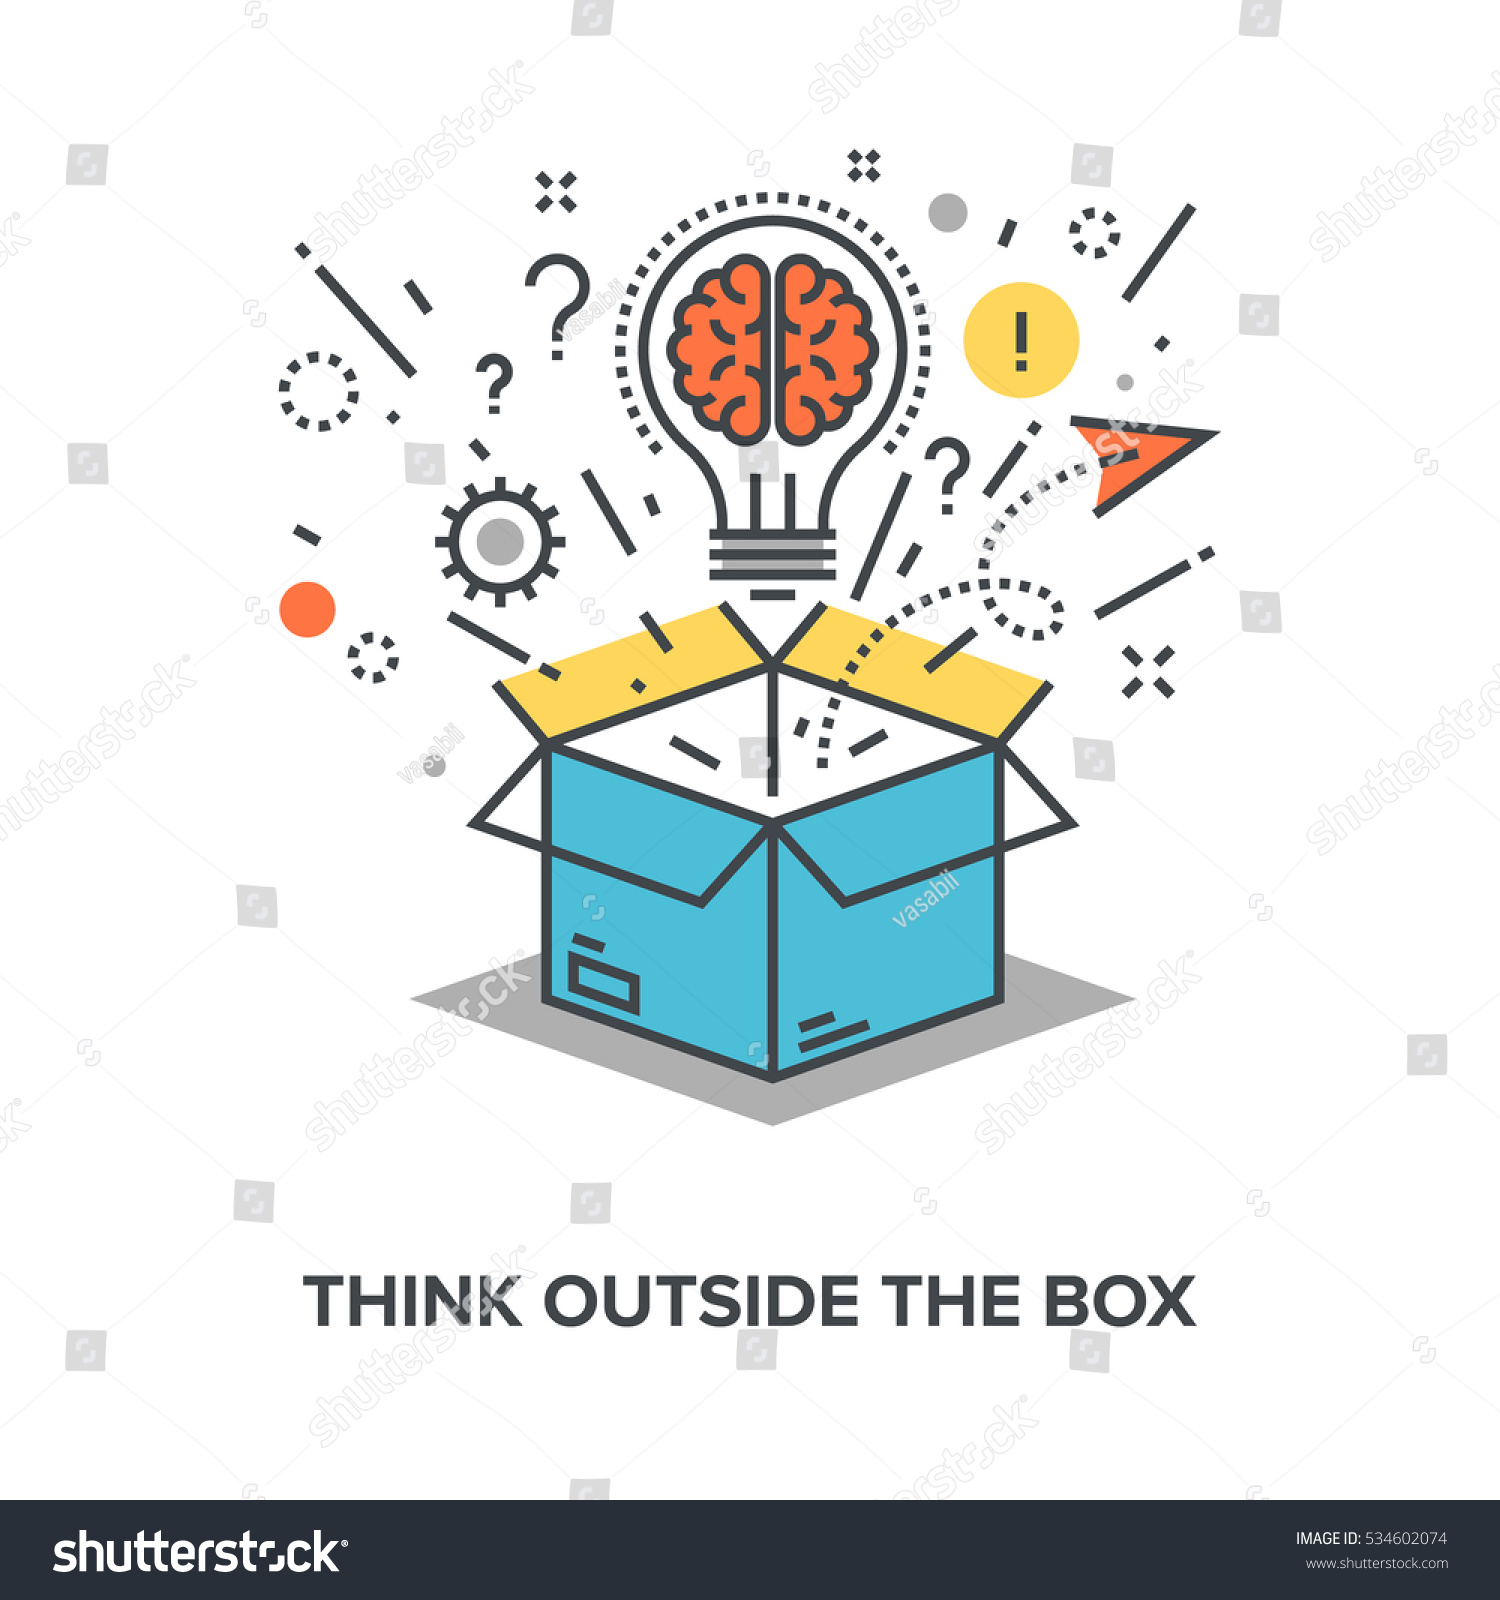 think outside the box #534602074